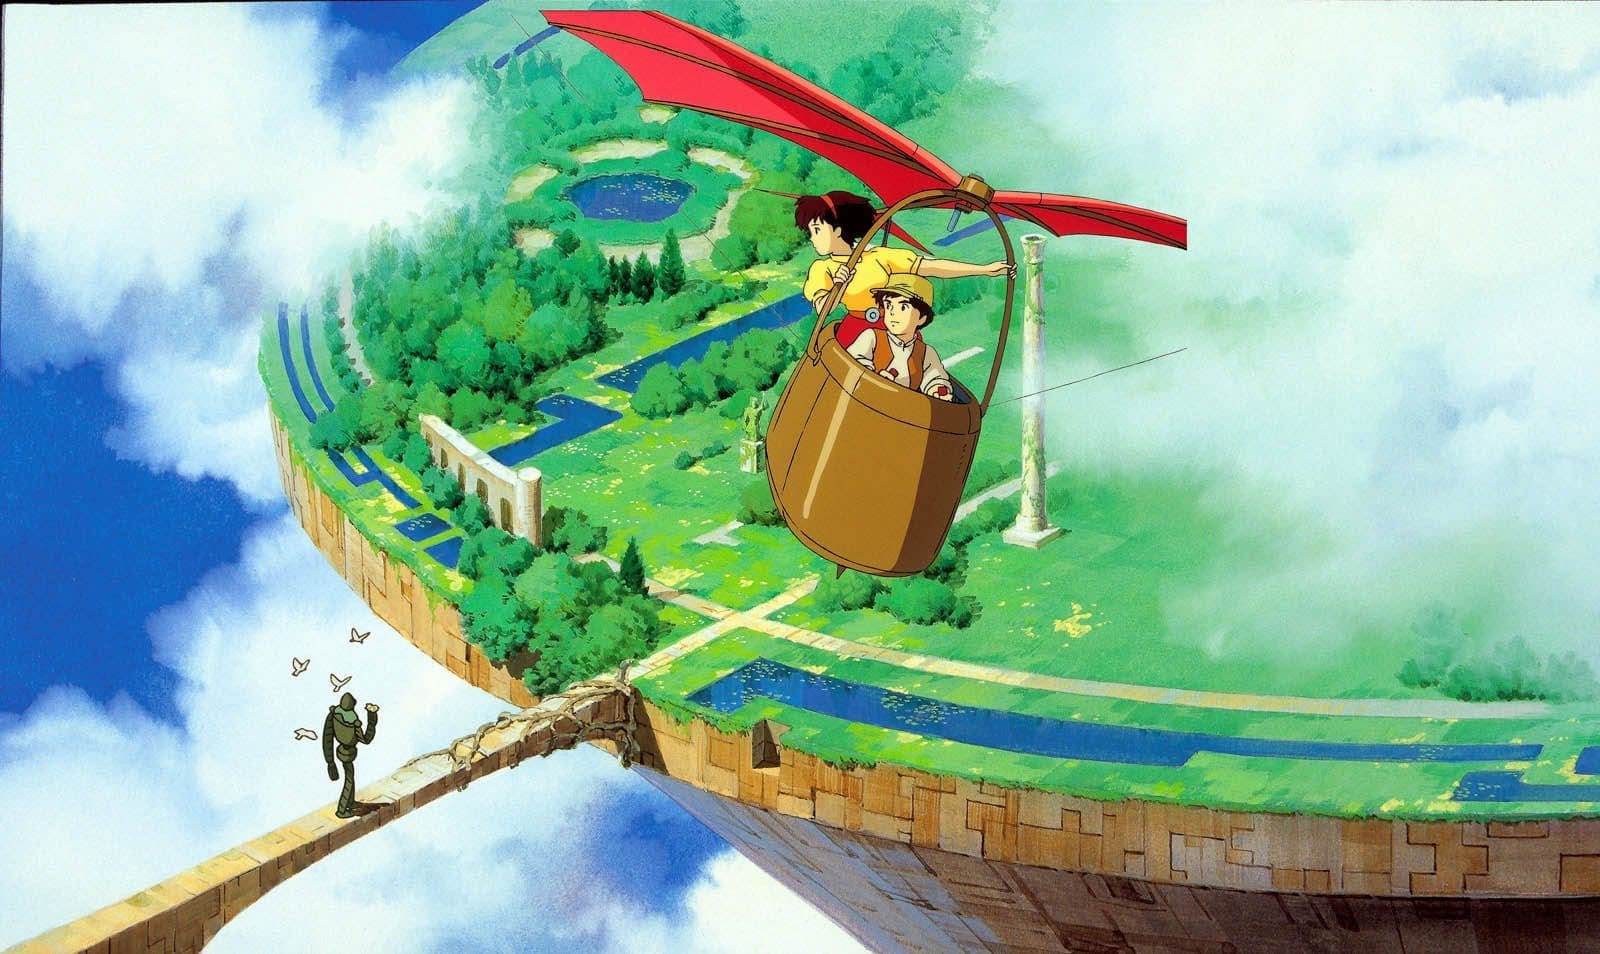 anime news, castle in the sky, Fathom Events, ghibli fest, gkids, howls moving castle, kikis delivery service, movie news, mune guardian of the moon, My Neighbor Totoro, nausicaa of the valley of the wind, spirited away, studio ghibli